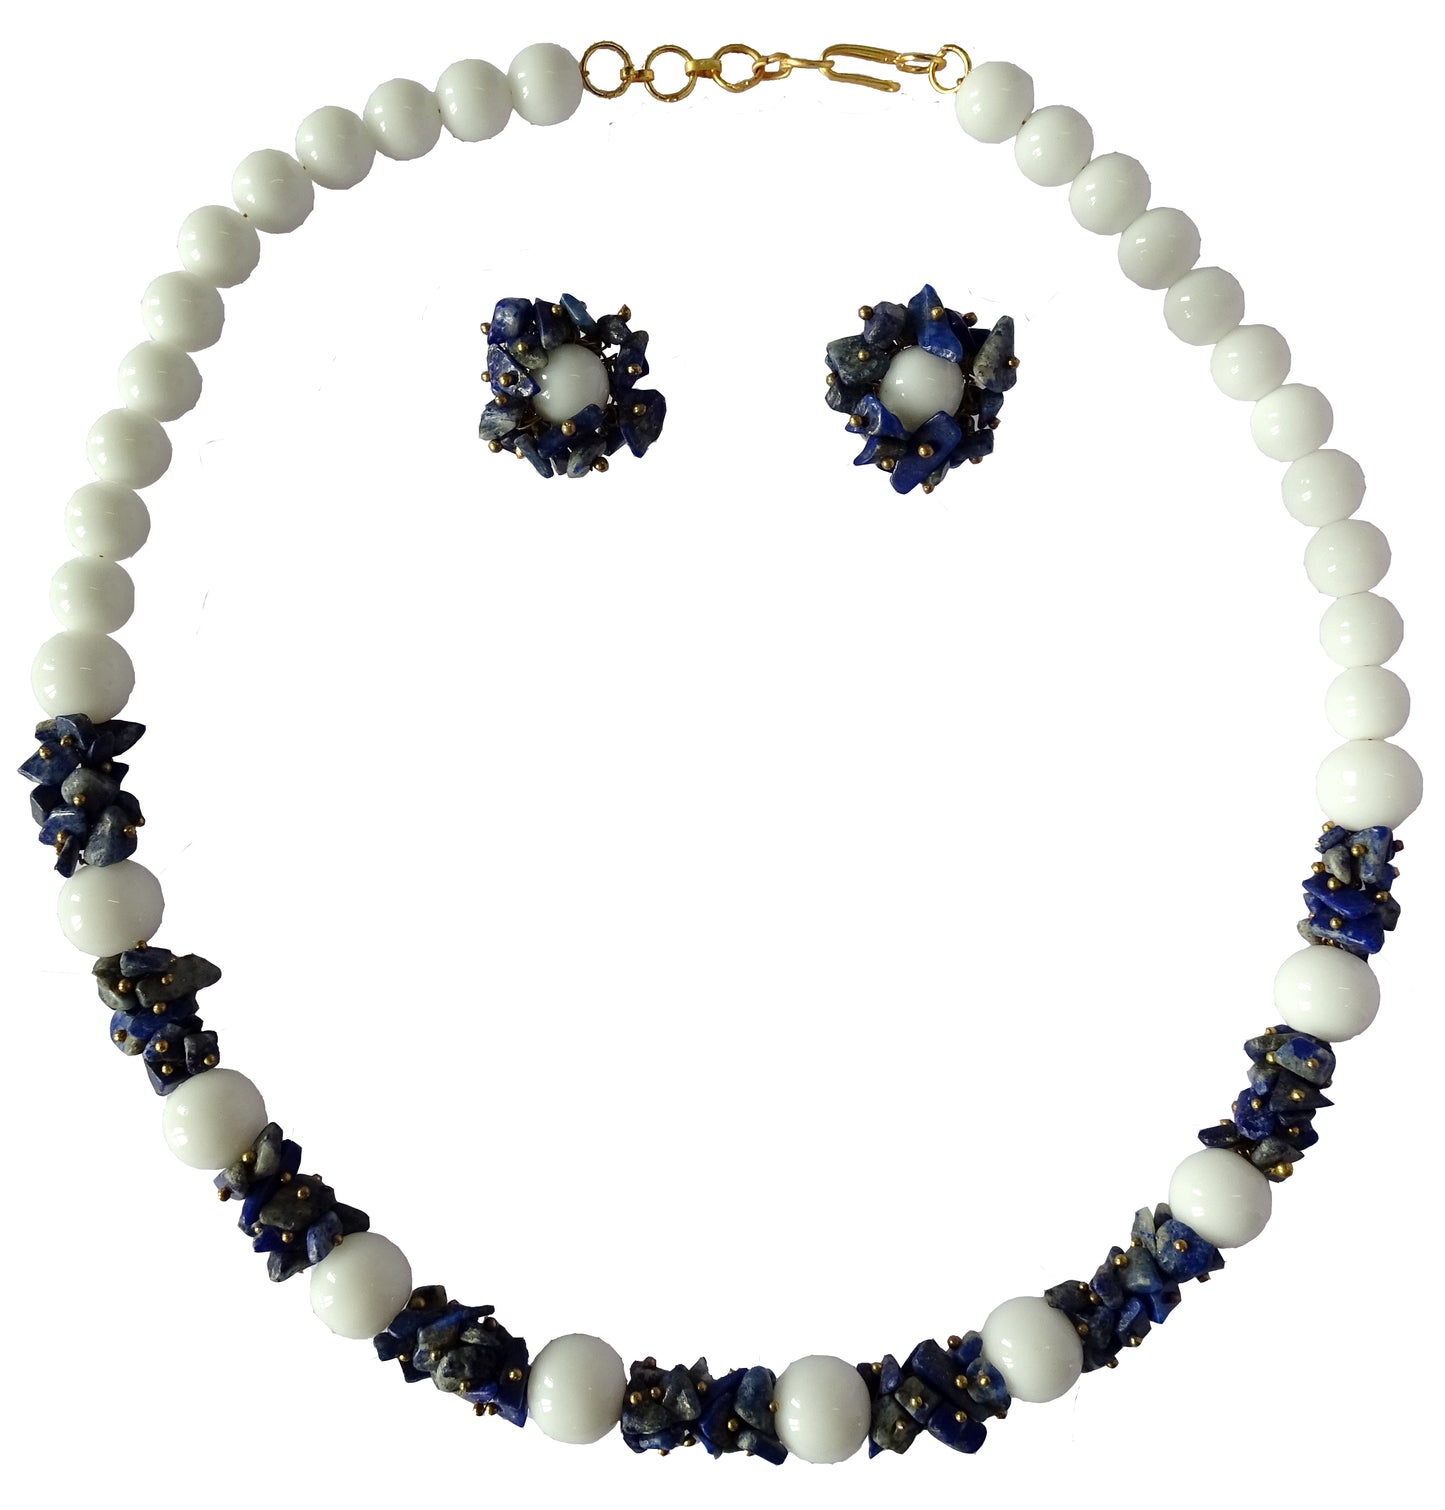 Centorganic - Semi Precious Gemstone Crystal Beads Necklace with Earring ,Lapis Lazuli Stone chip and white Jade length 16" Mala for Girl and Women Fashion Jewellery, with beautiful jewellery box for gifting.